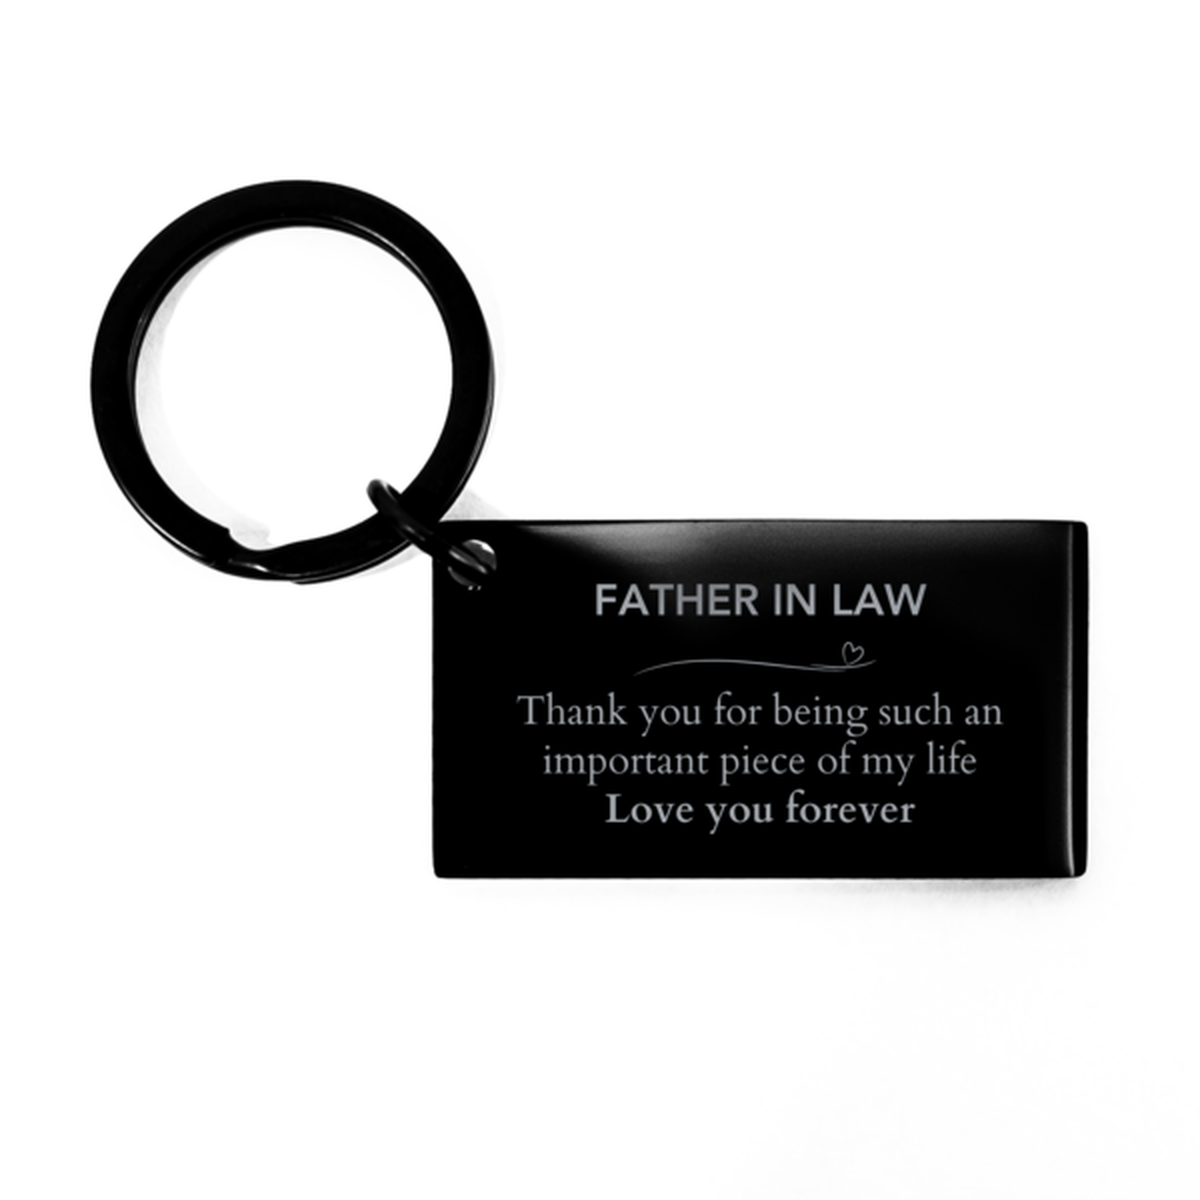 Appropriate Father In Law Keychain Epic Birthday Gifts for Father In Law Thank you for being such an important piece of my life Father In Law Christmas Mothers Fathers Day